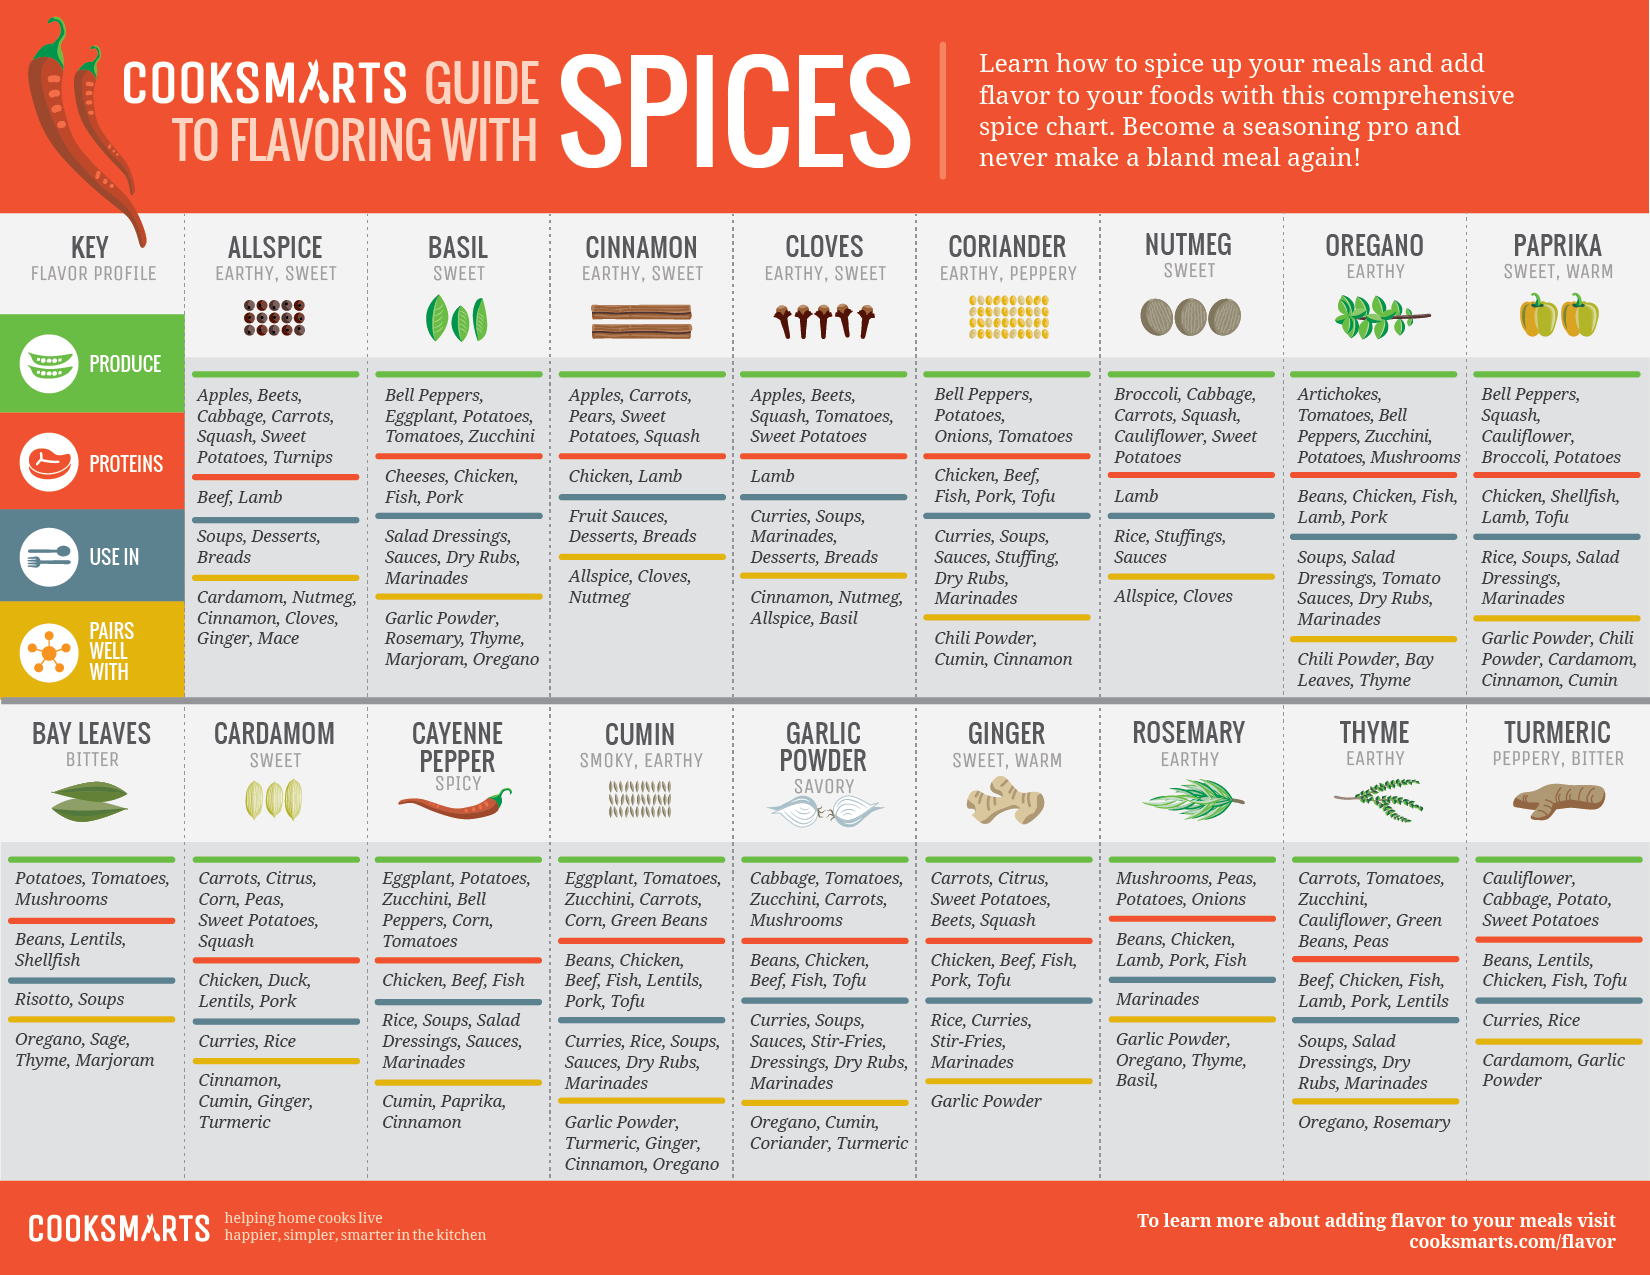 Spices by Cuisine